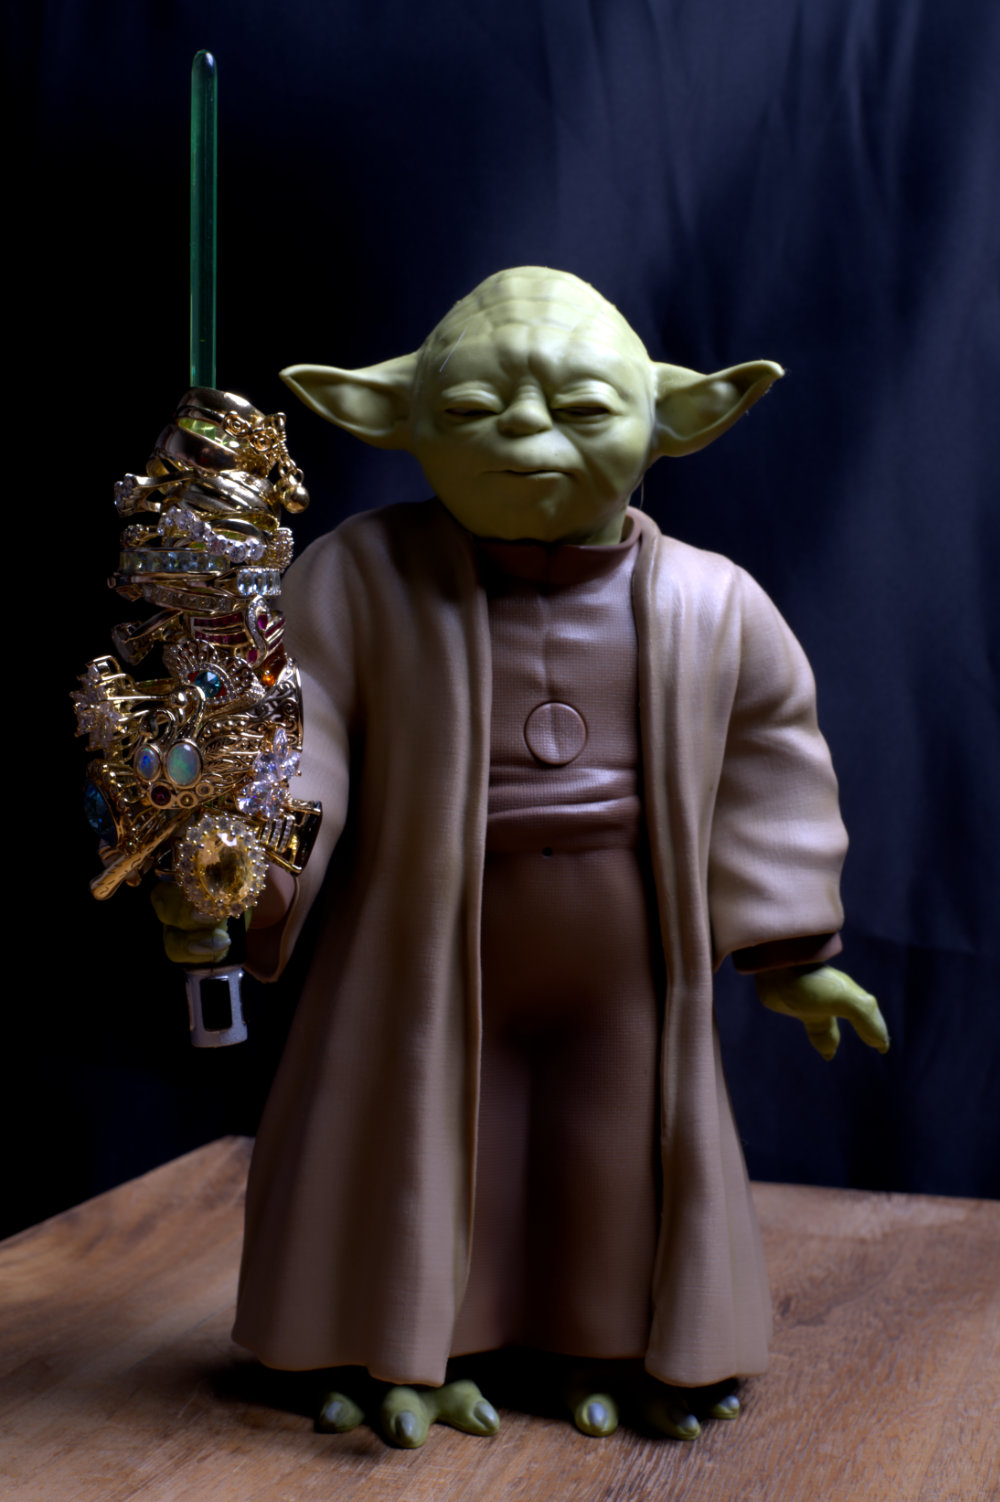 Gold Rings with Yoda